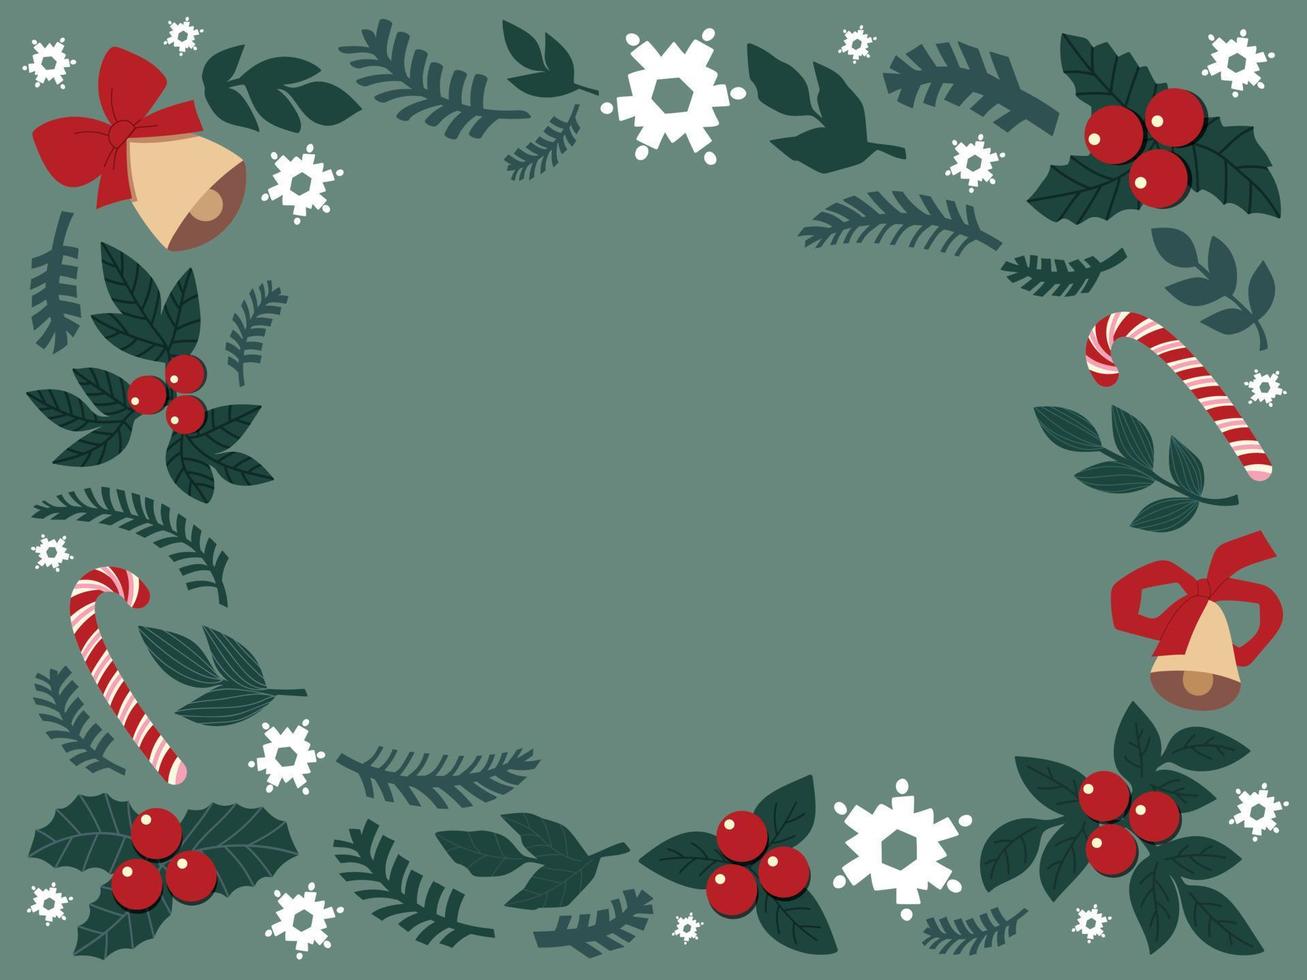 christmas background frame made of drawn cute elements. mistletoe, snowflakes, spruce, bells, lollipops. for Christmas cards, posters. vector flat illustration.